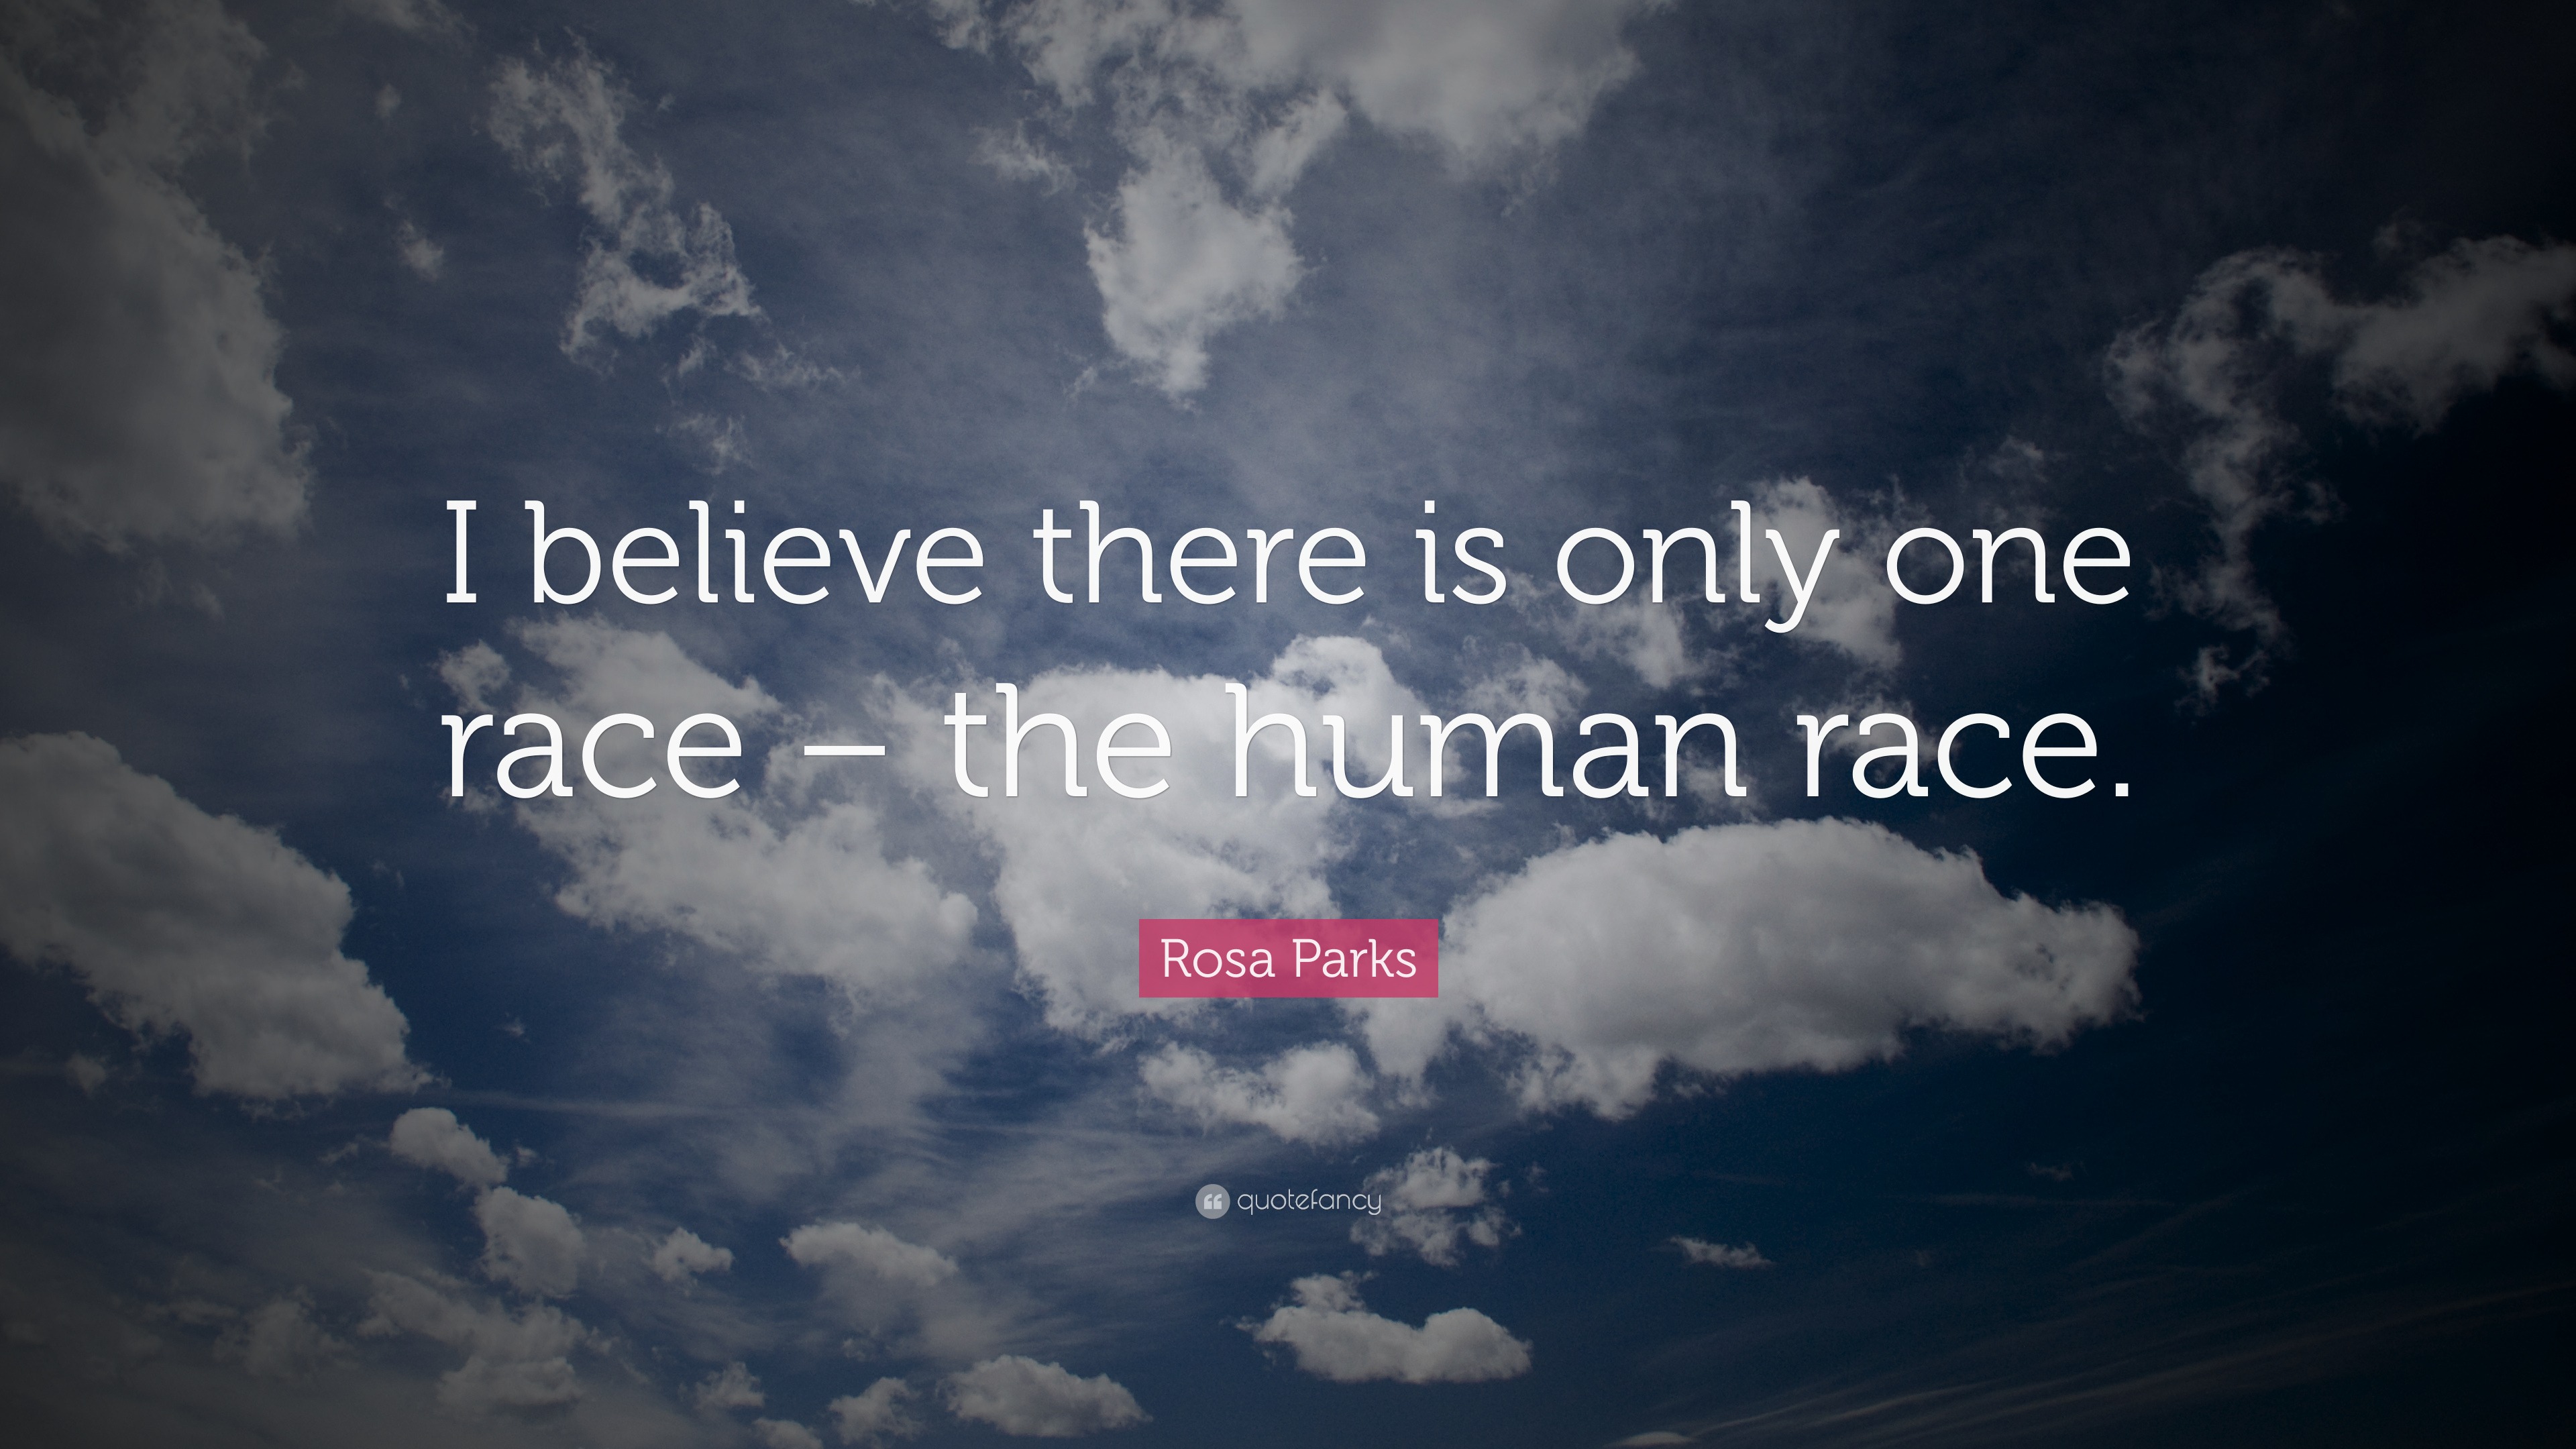 Rosa Parks Quote: "I believe there is only one race - the human race." (12 wallpapers) - Quotefancy